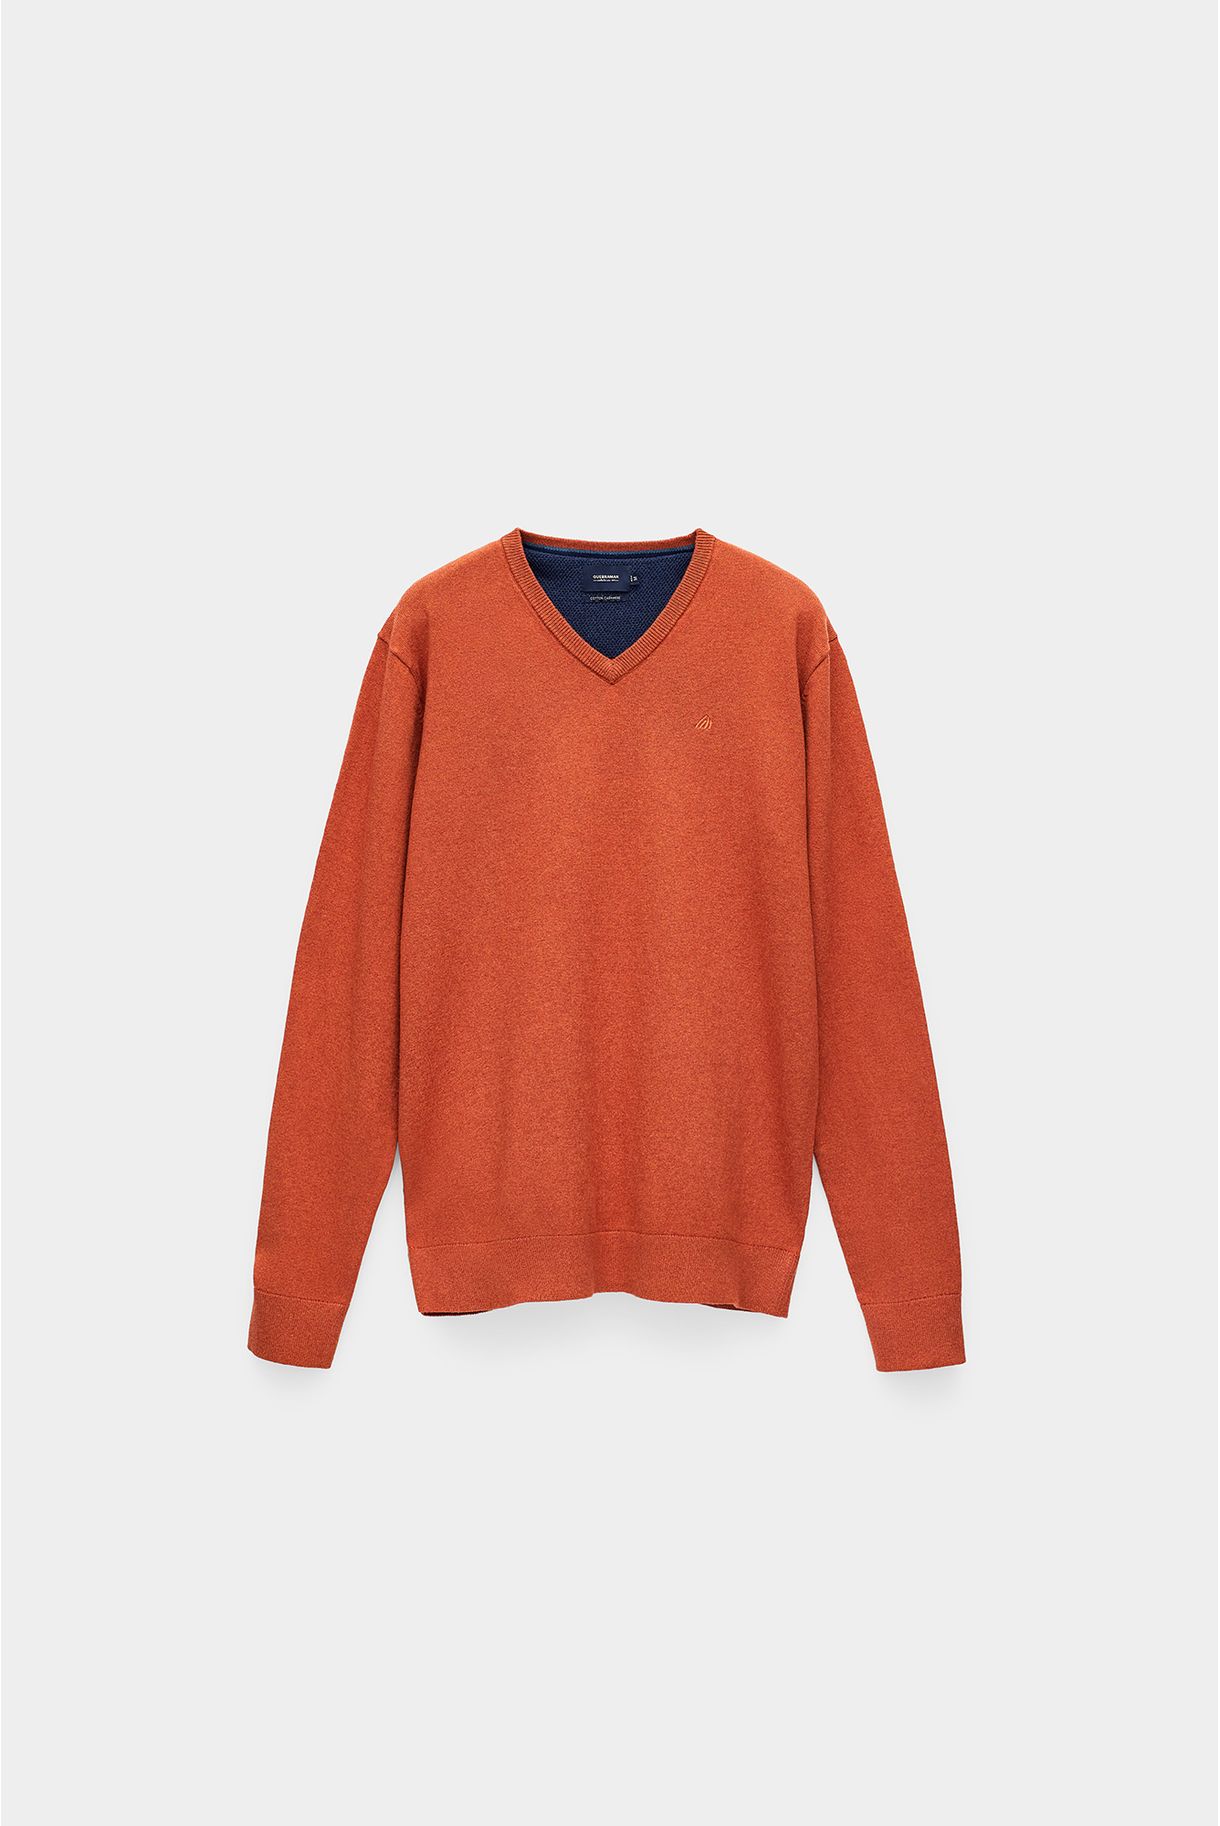 BASIC V-neck KNIT IN COTTON AND CASHMERE